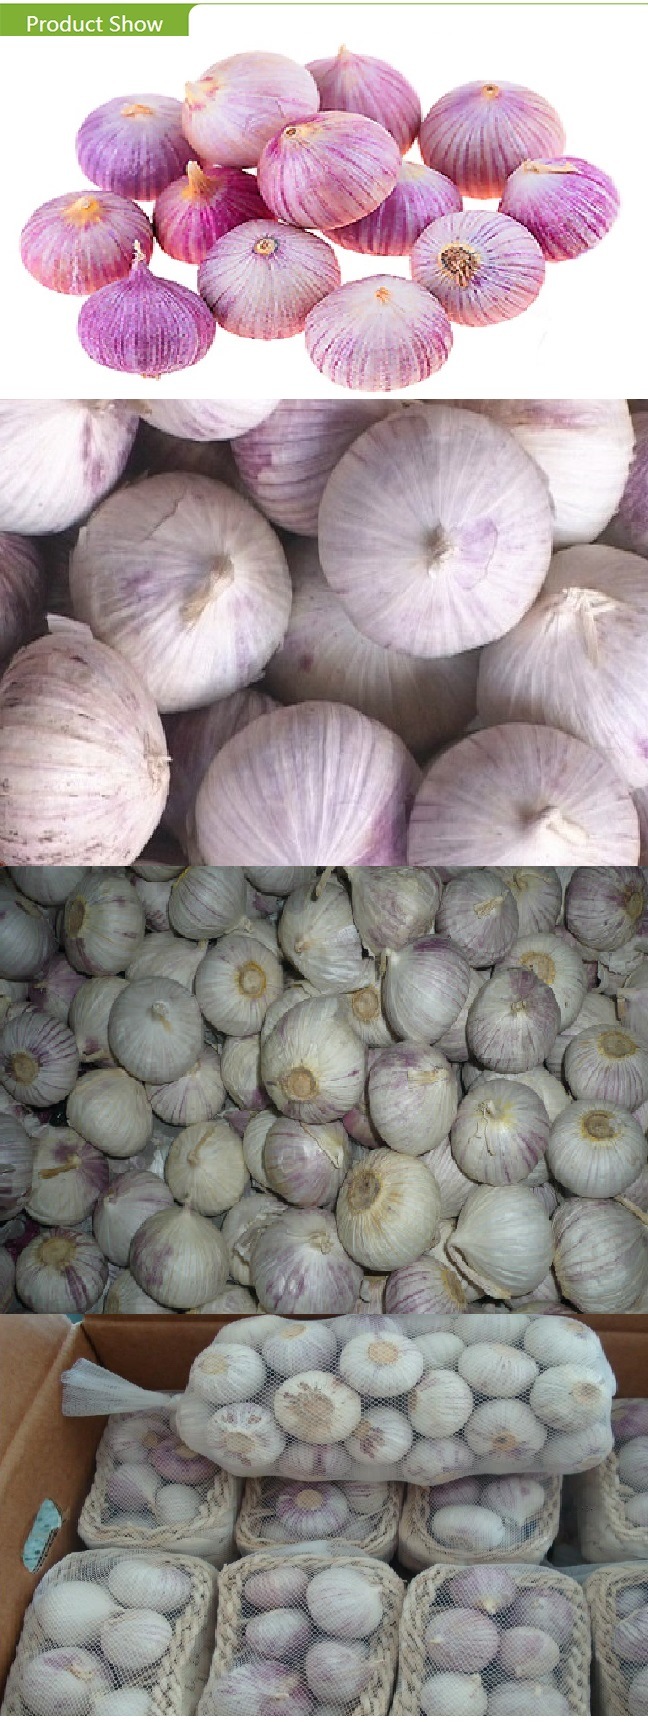 Chinese Fresh Solo Garlic with Good Price